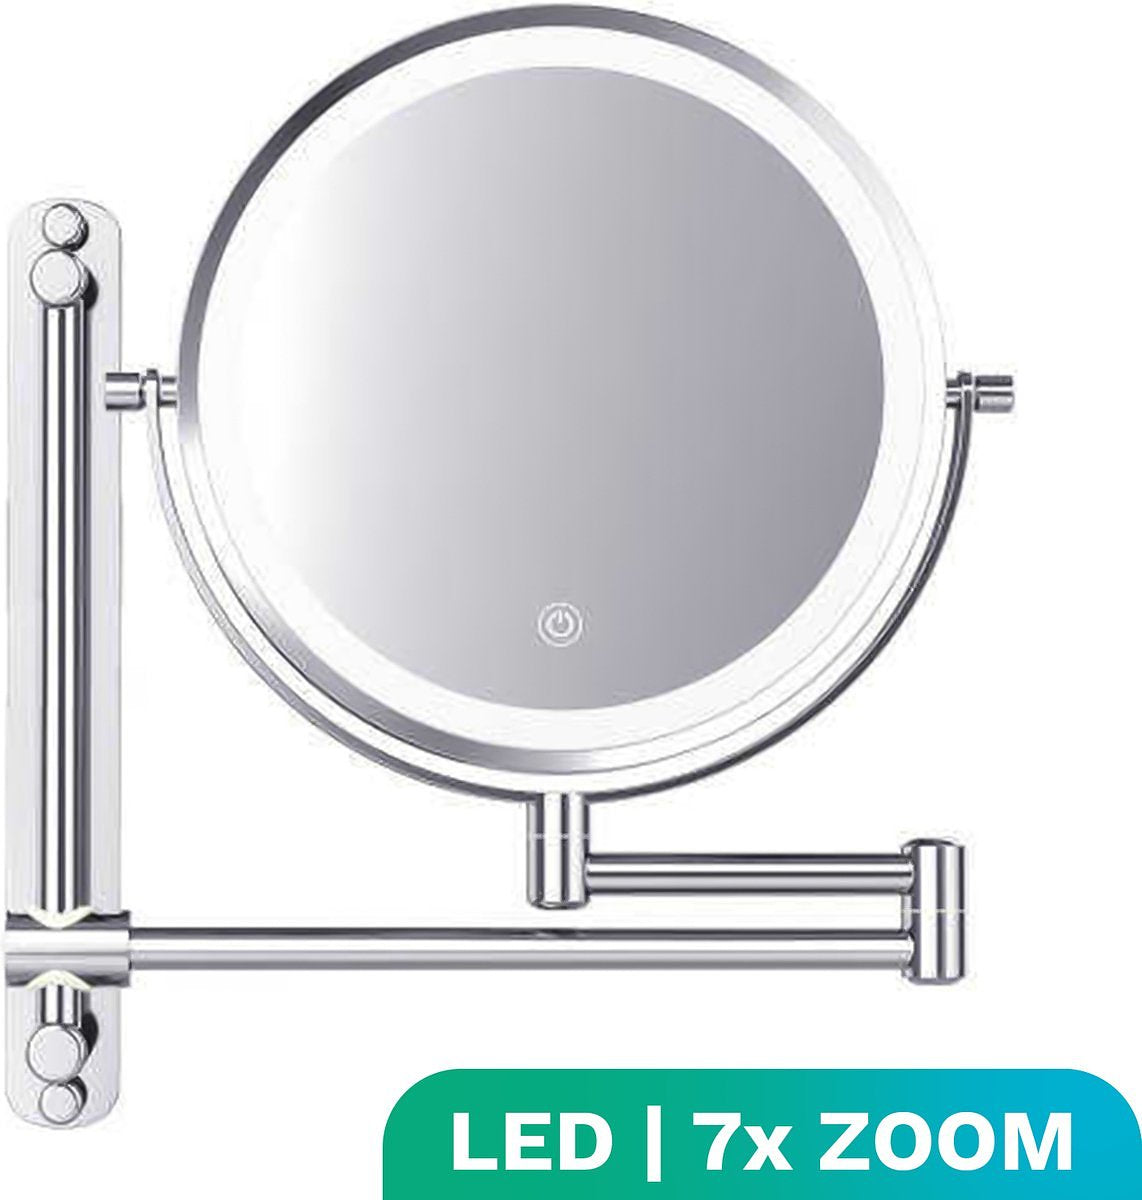 Mirlux Make Up Mirror with LED lighting - 7X Magnification - Wall Mirror Round - Chrome